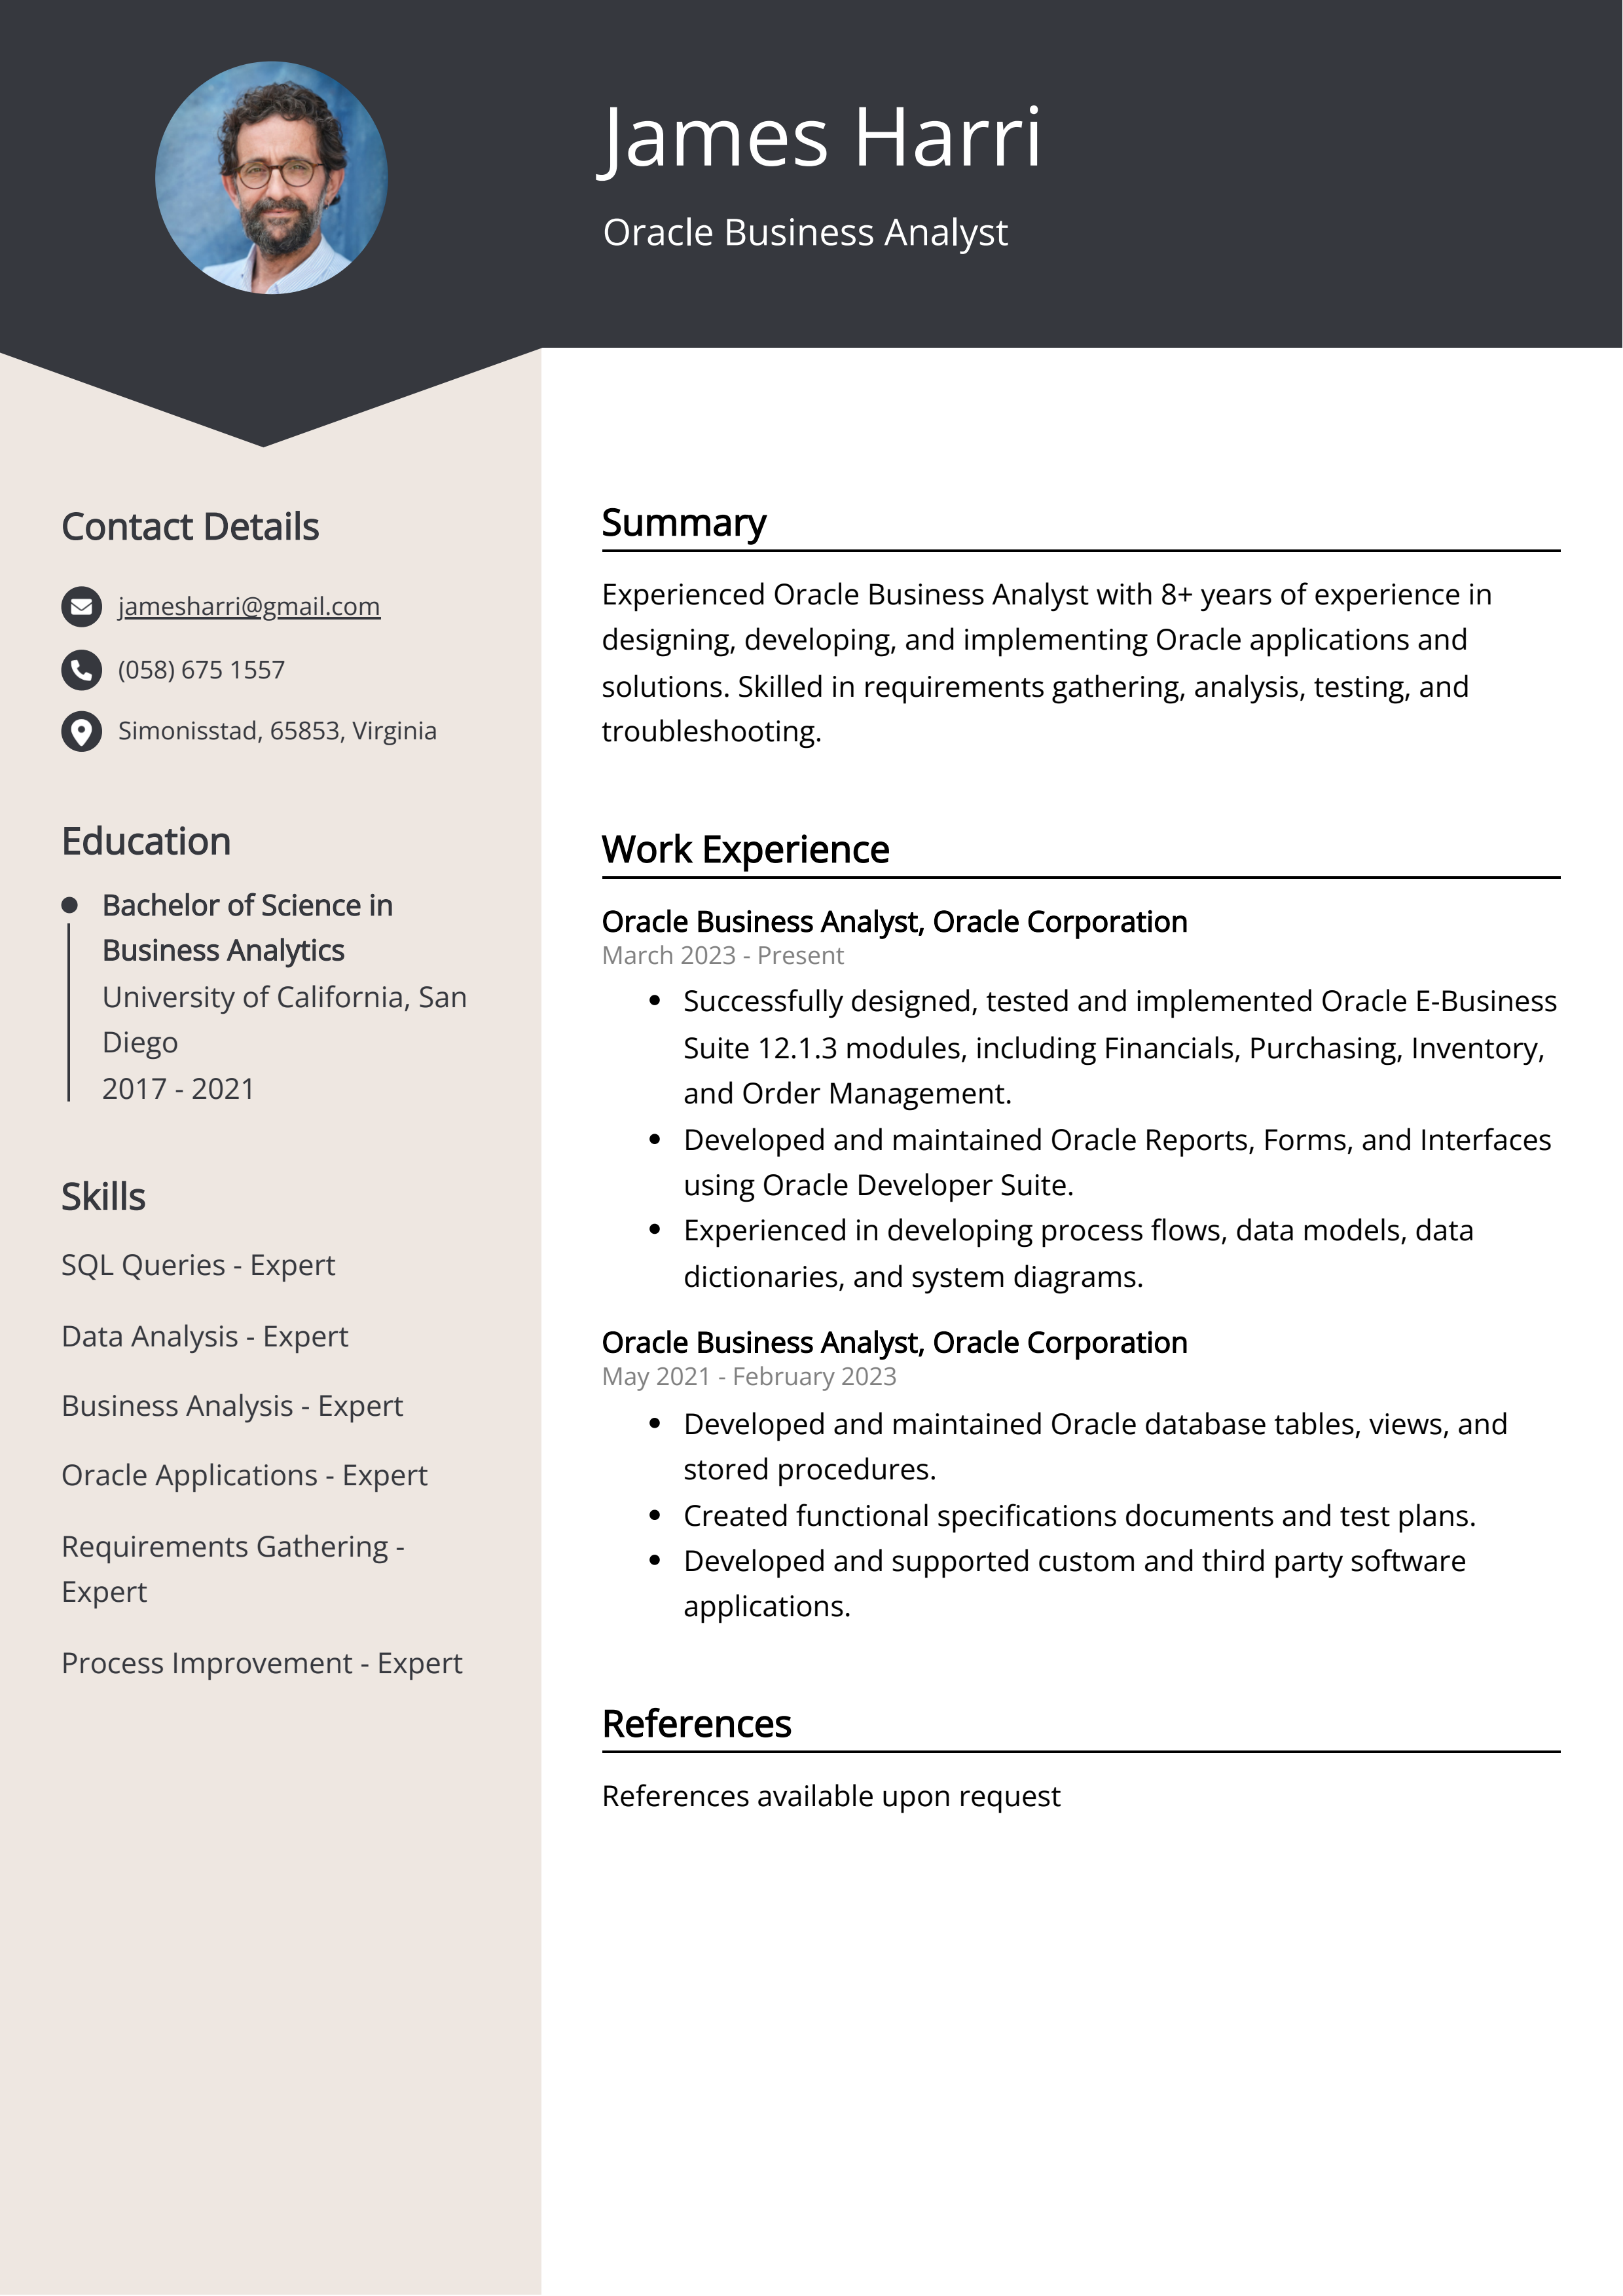 Oracle Business Analyst CV Example